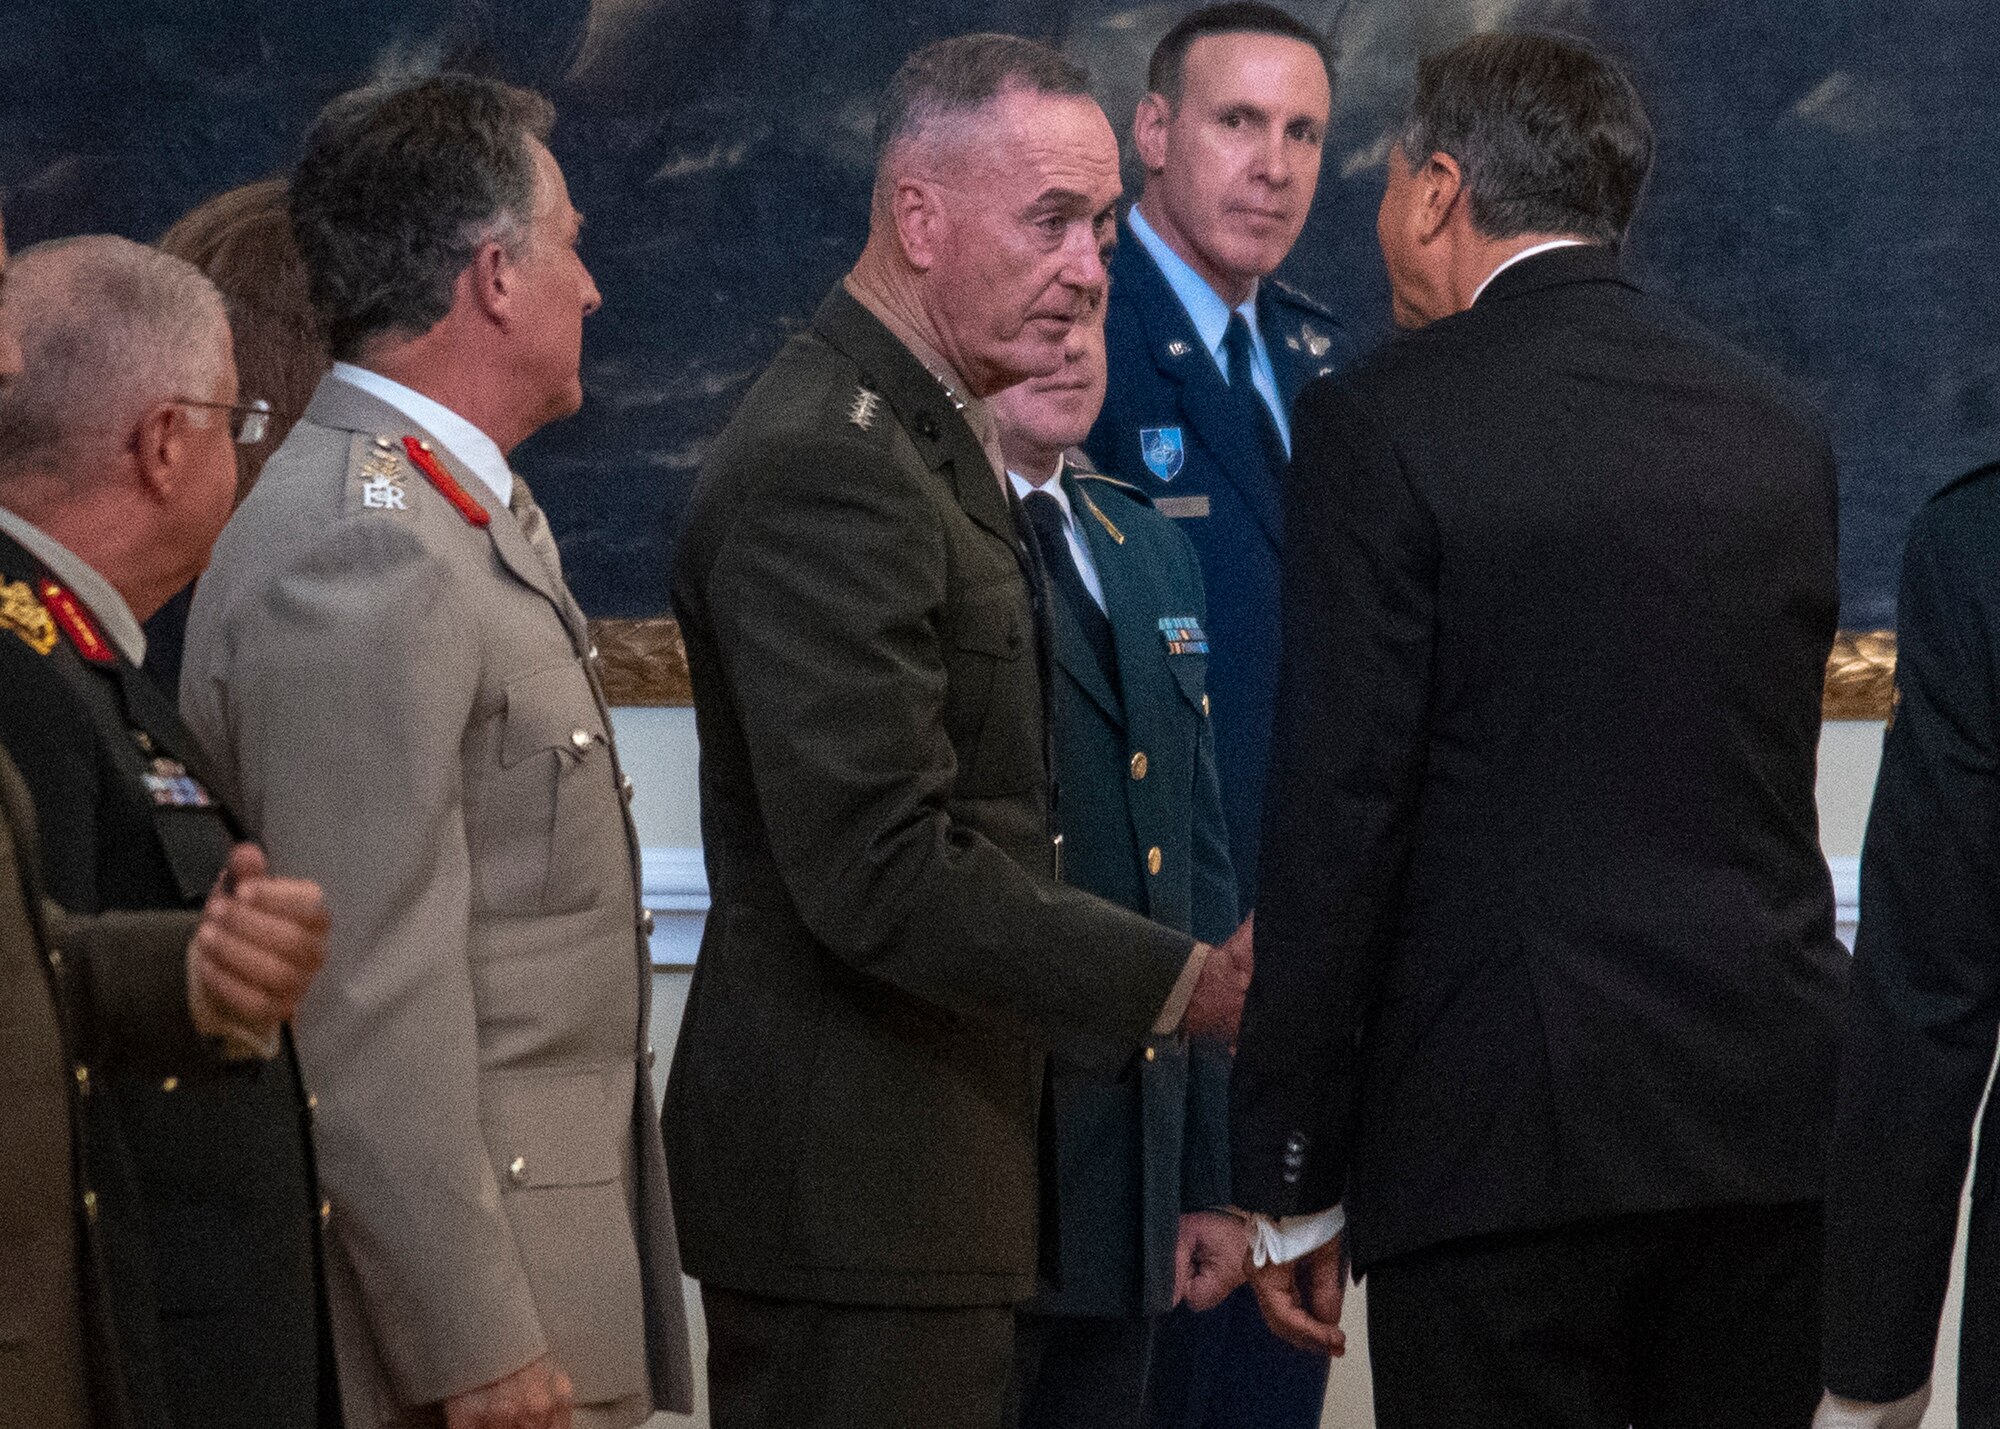 Marine Corps Gen. Joe Dunford, chairman of the Joint Chiefs of Staff, meets the President of the Republic of Slovenia Borut Pahor during the opening ceremony of the North Atlantic Treaty Organization Military Committee Conference at the National Gallery in Ljubljana, Slovenia,  Sept. 13, 2019.